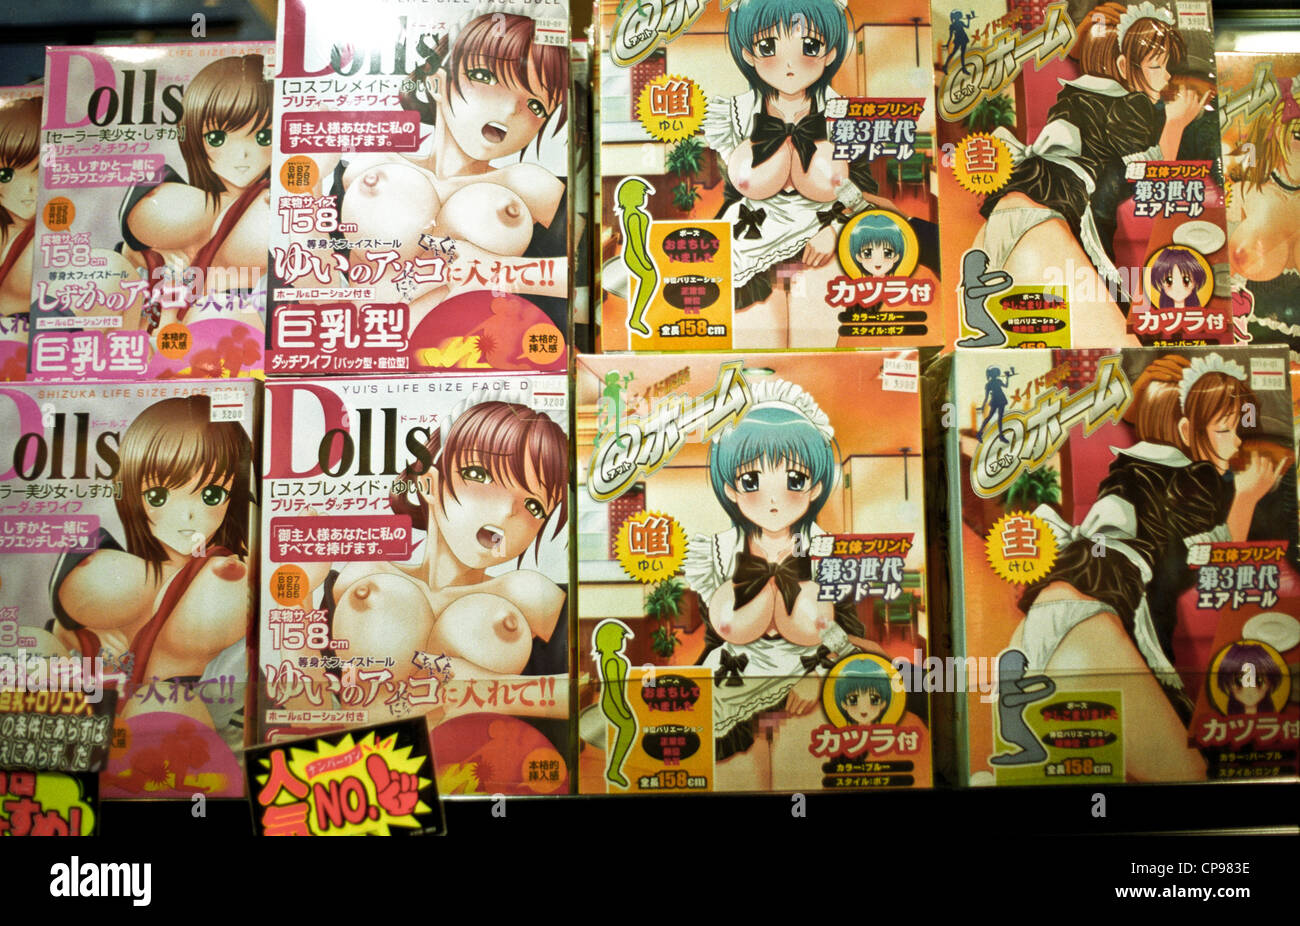 Porn magazines in a japanese Sex Shop in Tokyo, Japan. Stock Photo